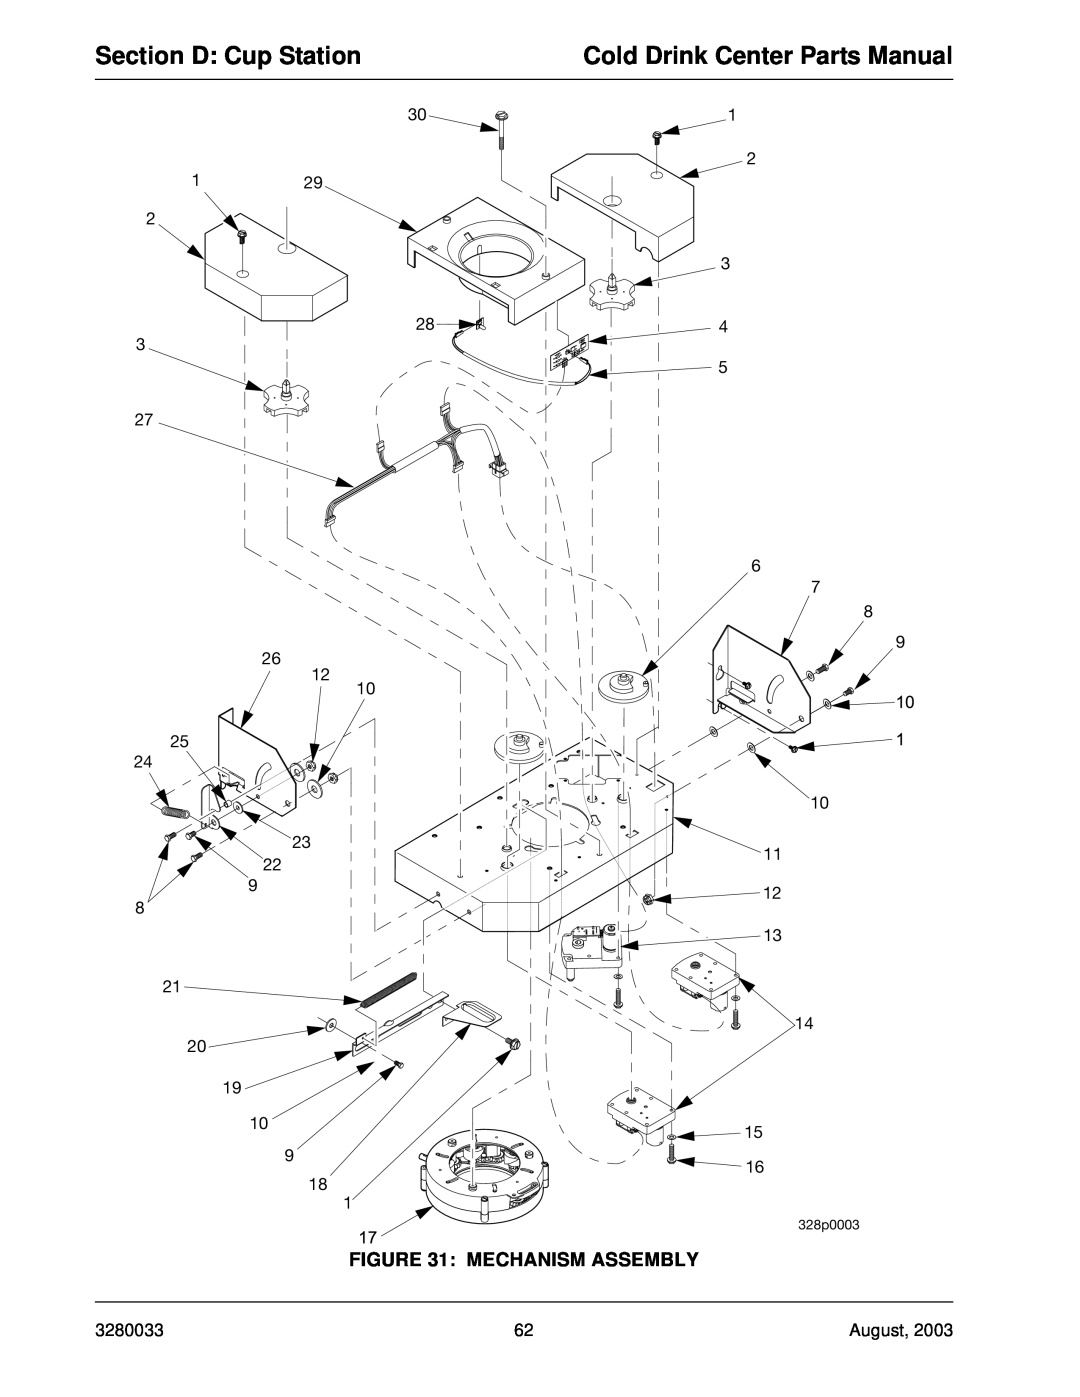 Crane Merchandising Systems 327 Section D Cup Station, Cold Drink Center Parts Manual, Mechanism Assembly, 328p0003 